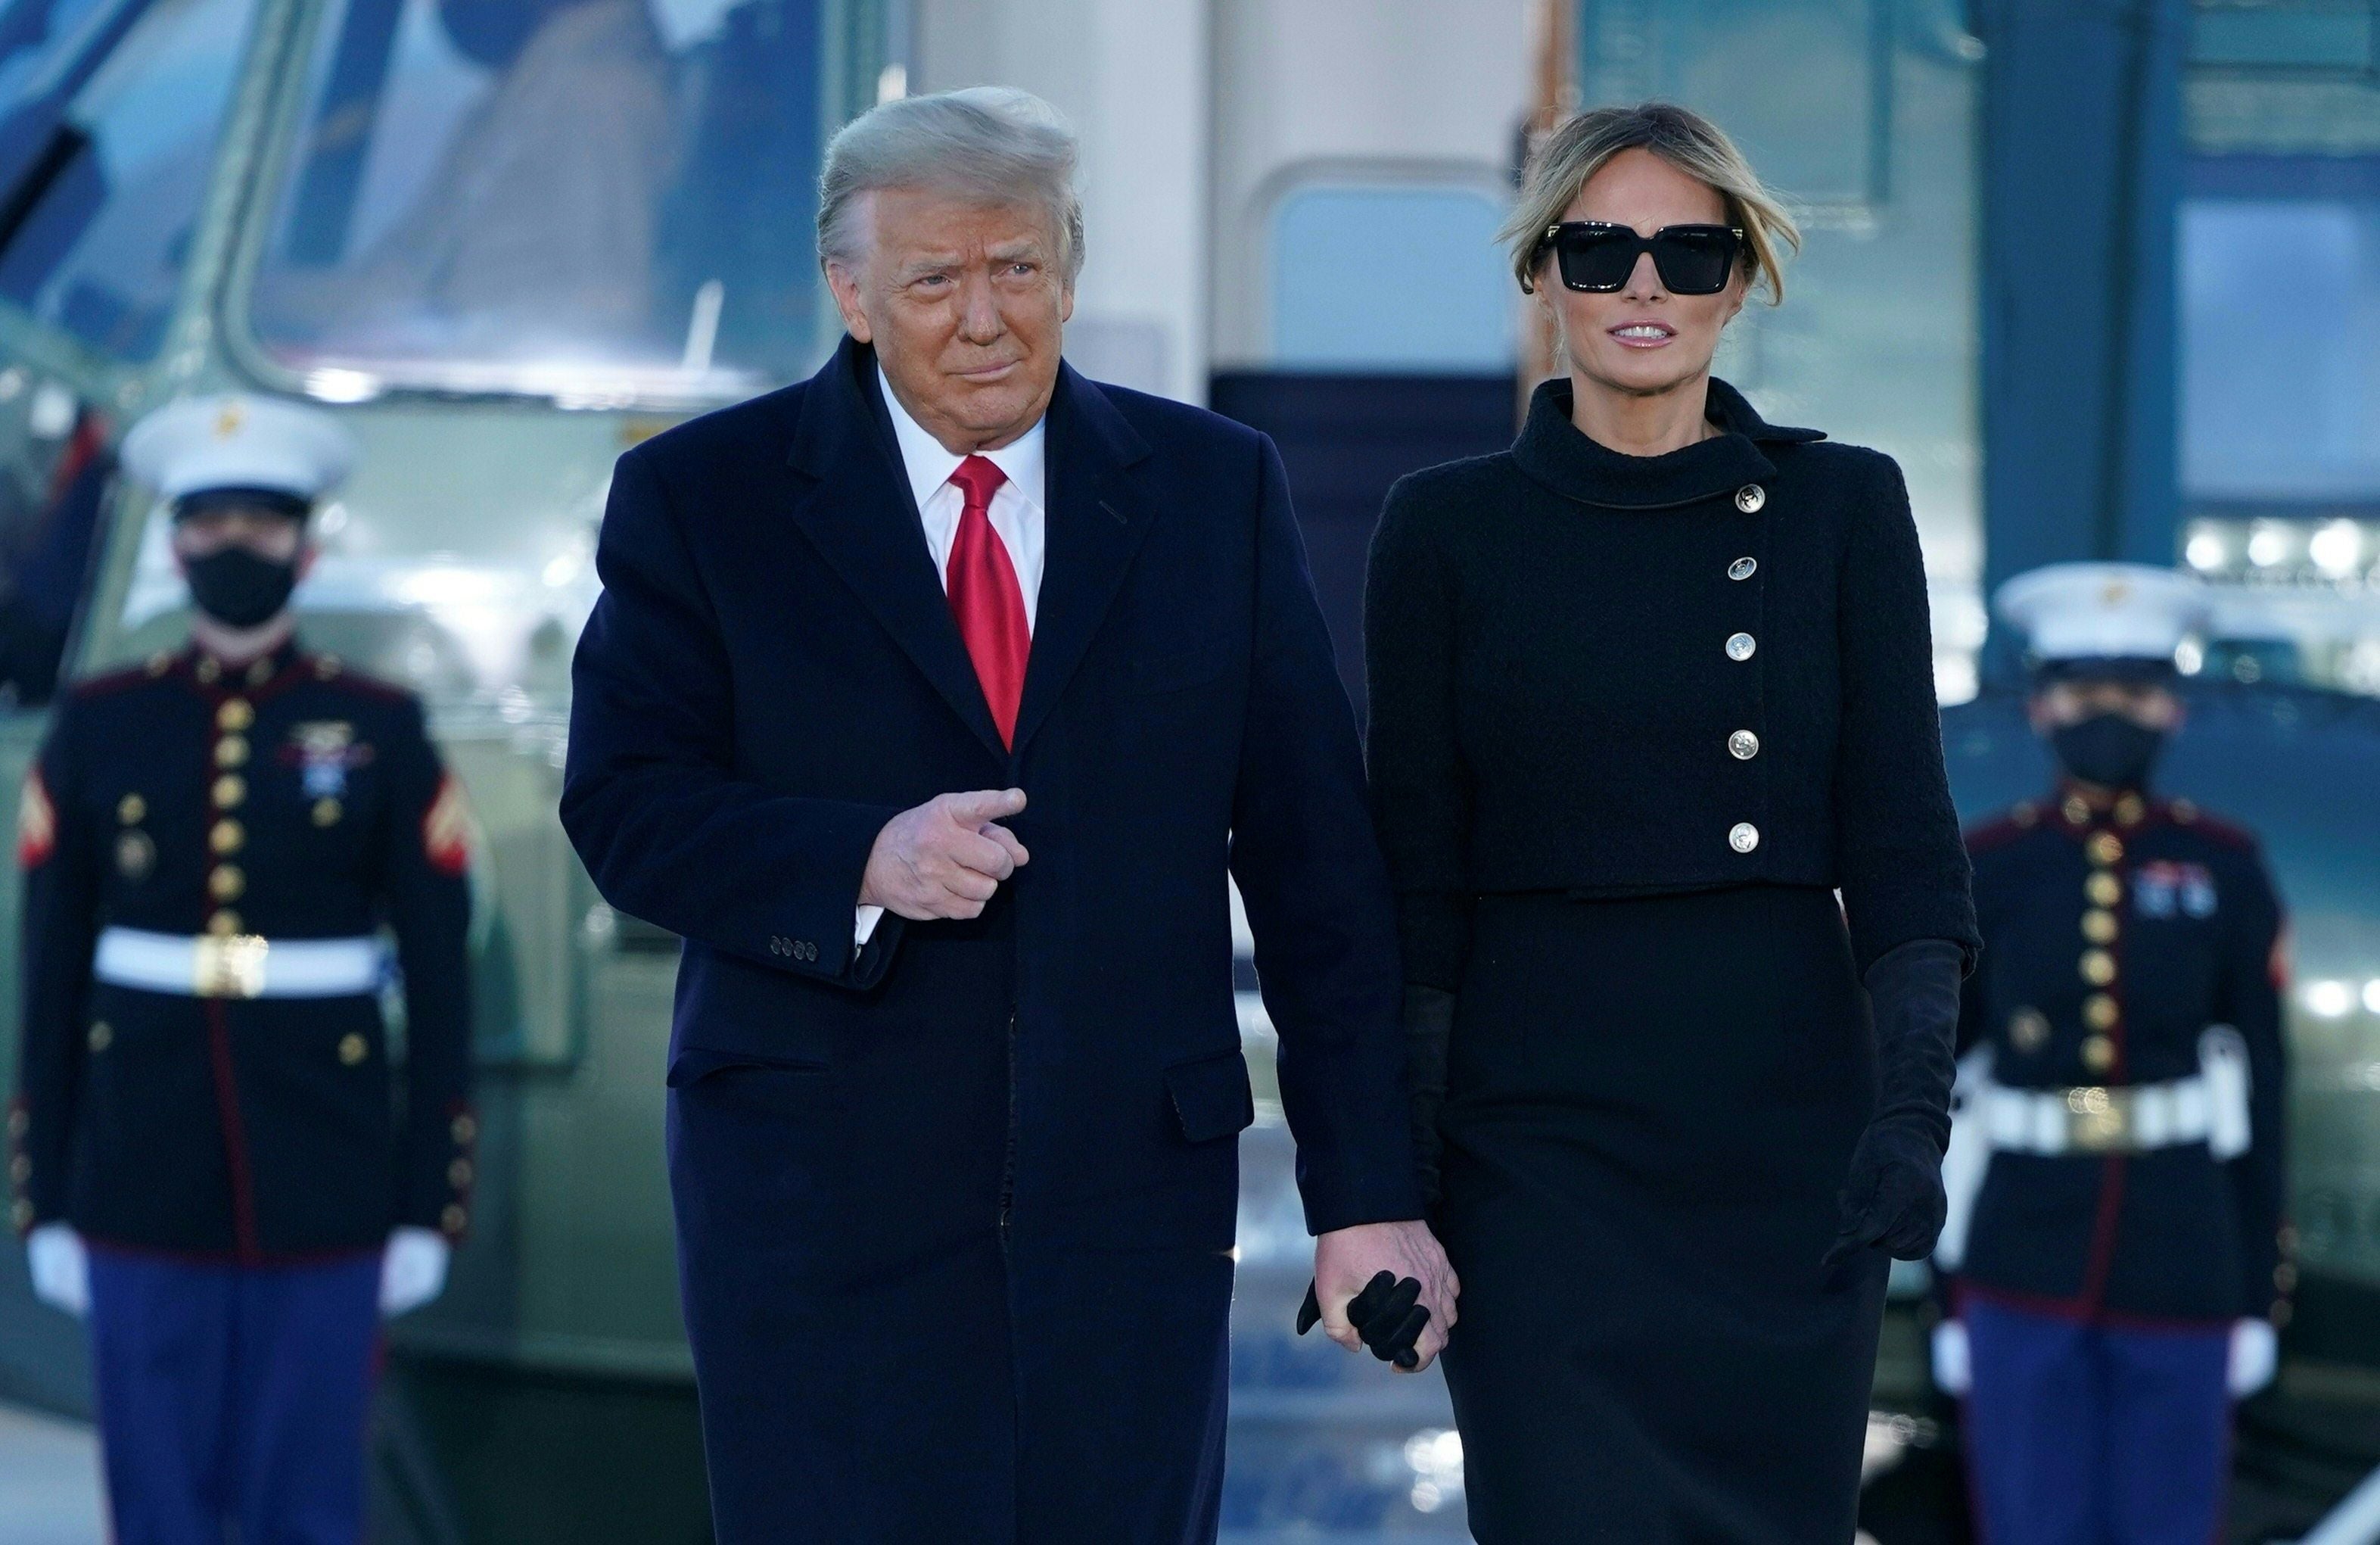 Donald and Melania Trump arrive in Mar a Lago after departing the White House